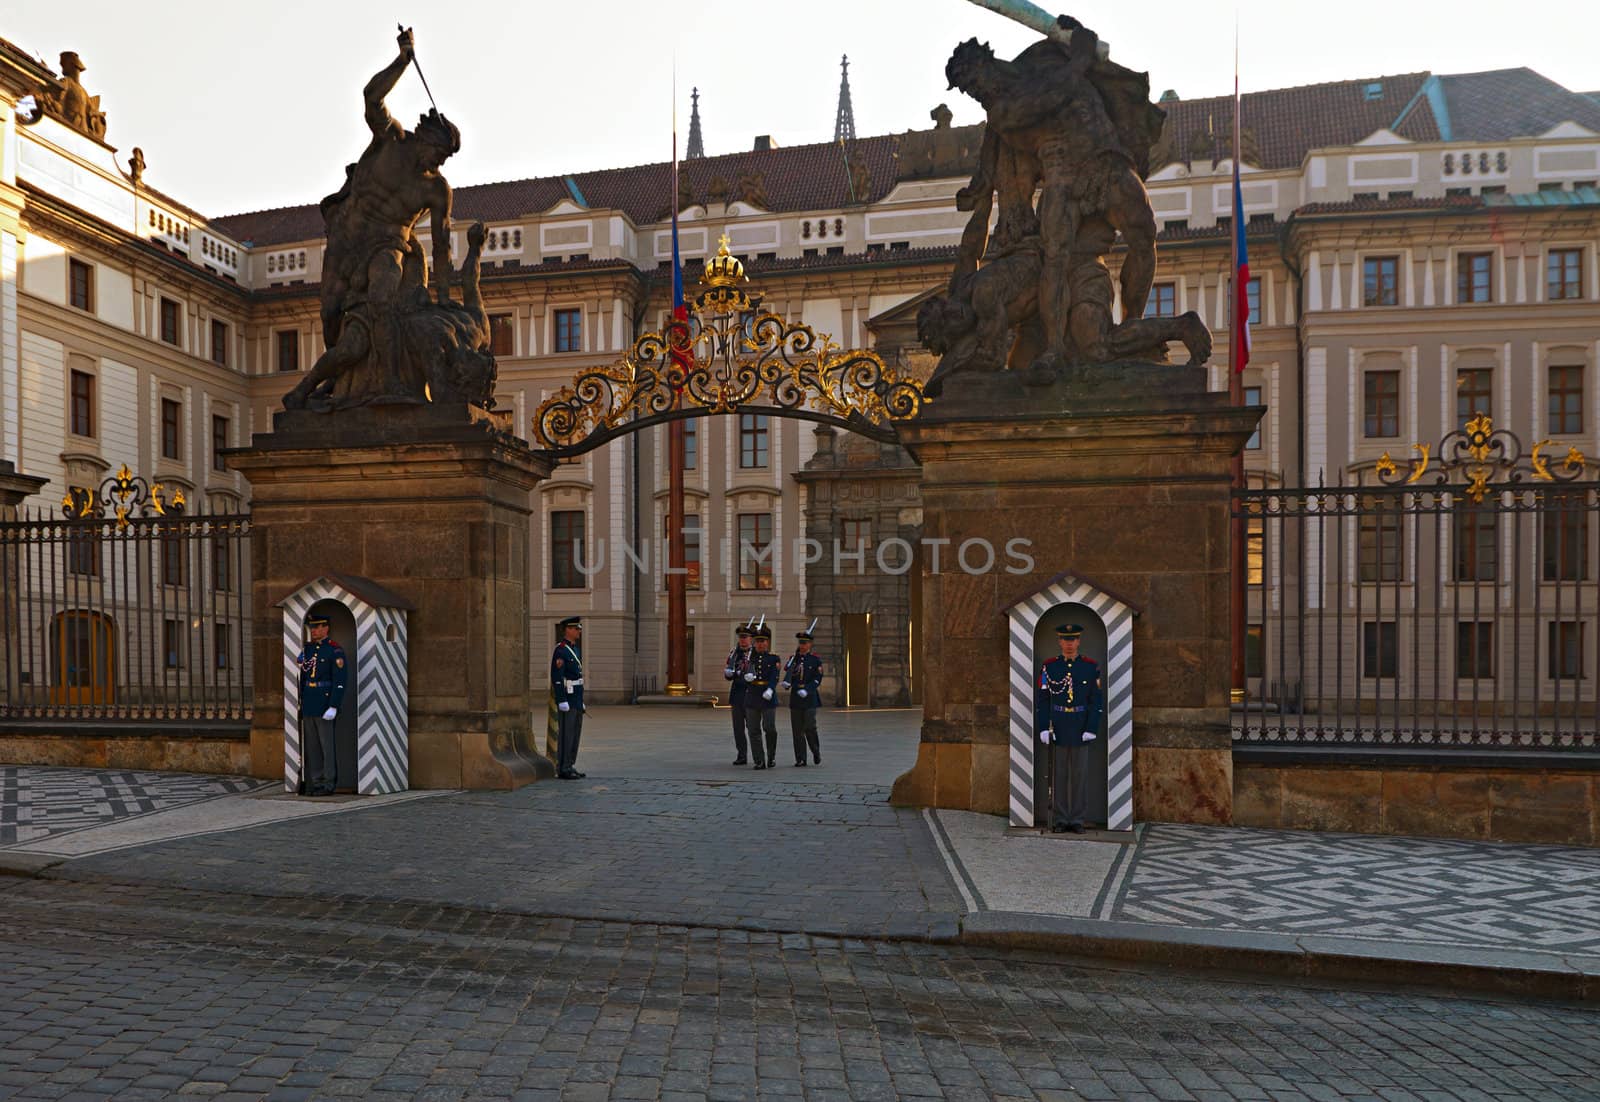 Change of honor guards at the presidential palace in Hradcany in Prague.